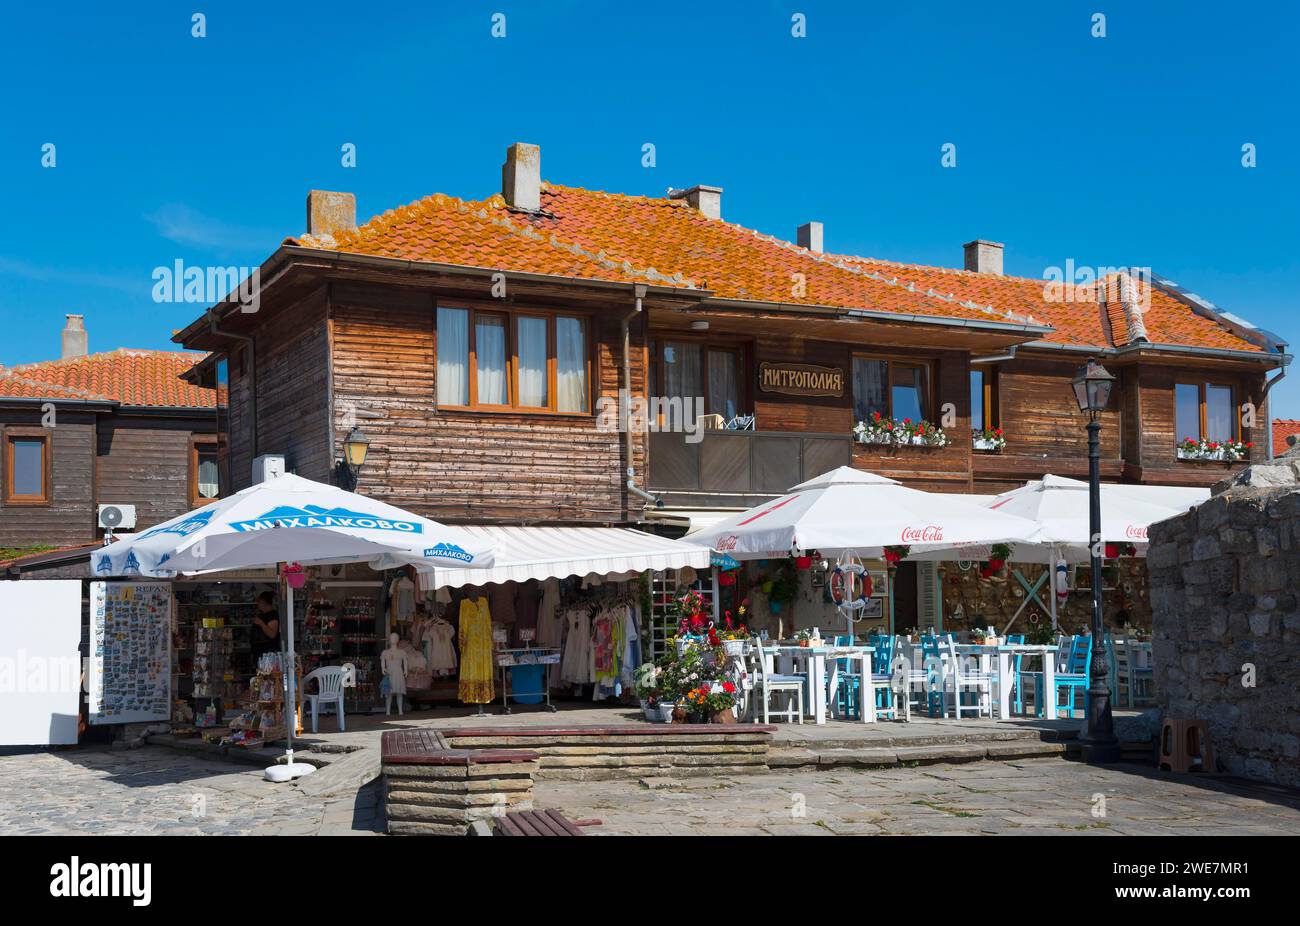 Restaurant with open-air tables next to souvenir shops in a traditional wooden building, Black Sea, Nesebar, Nessebar, Burgas, Bulgaria Stock Photo